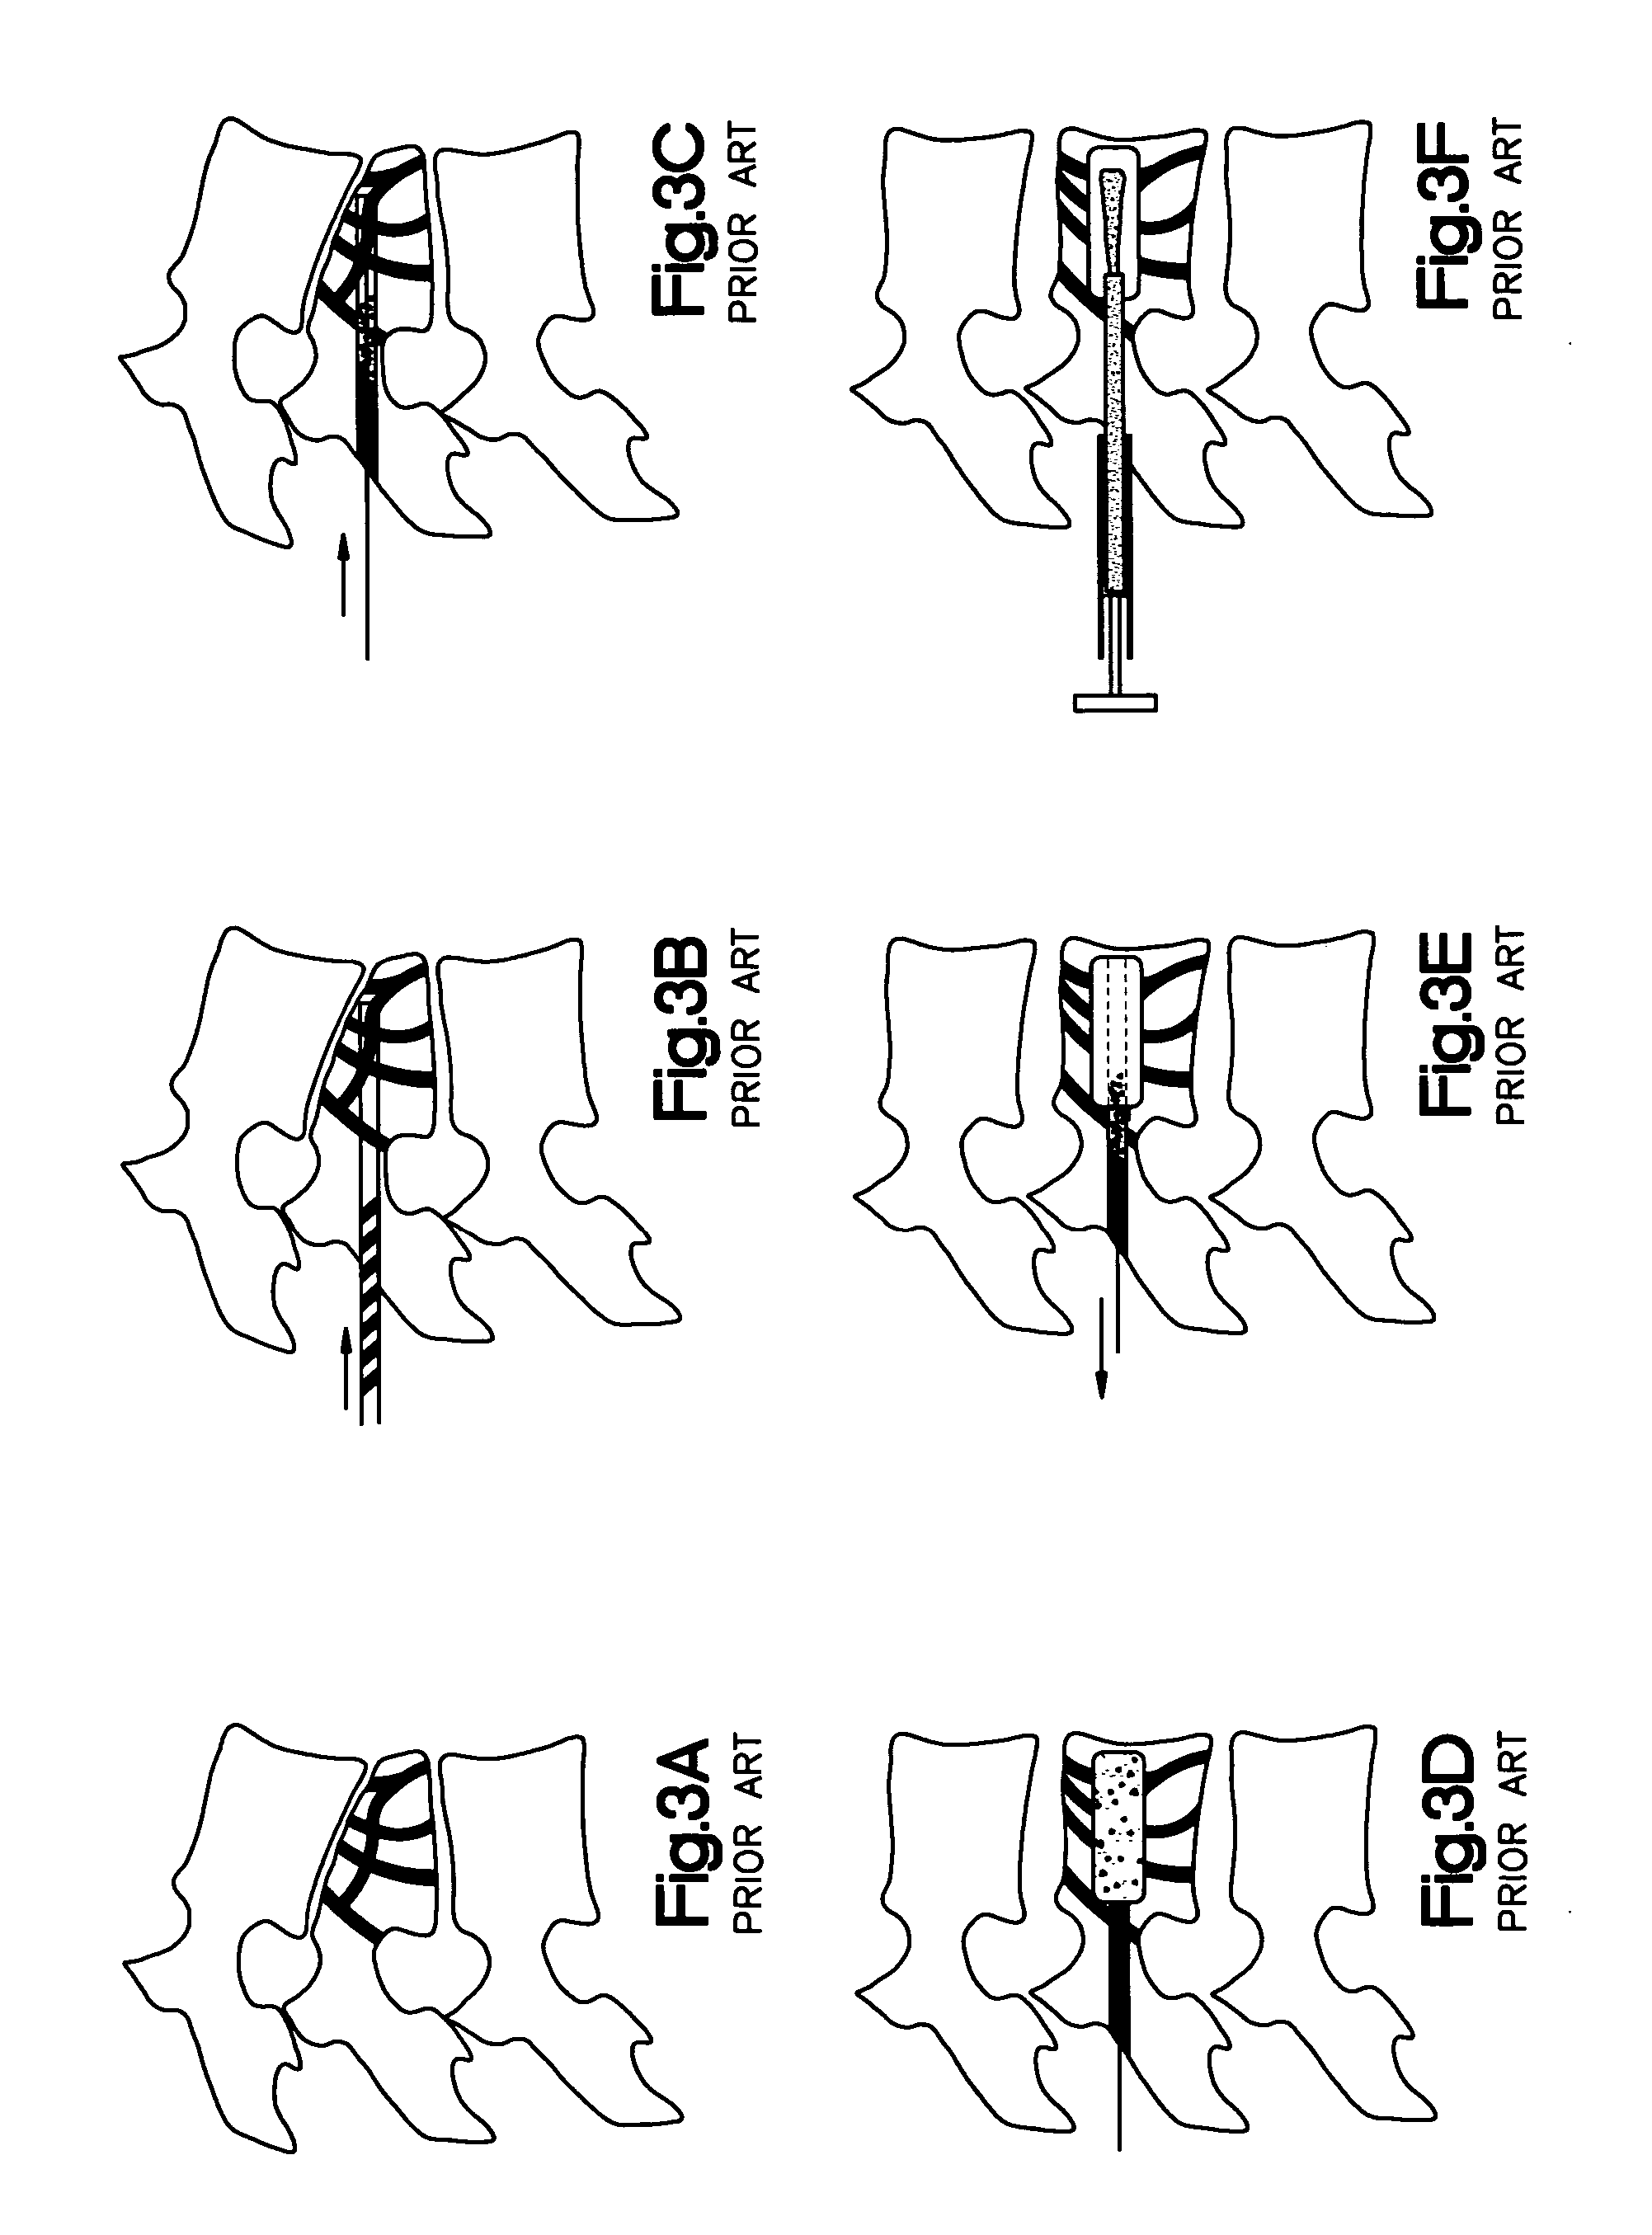 Apparatus and methods for treating bone